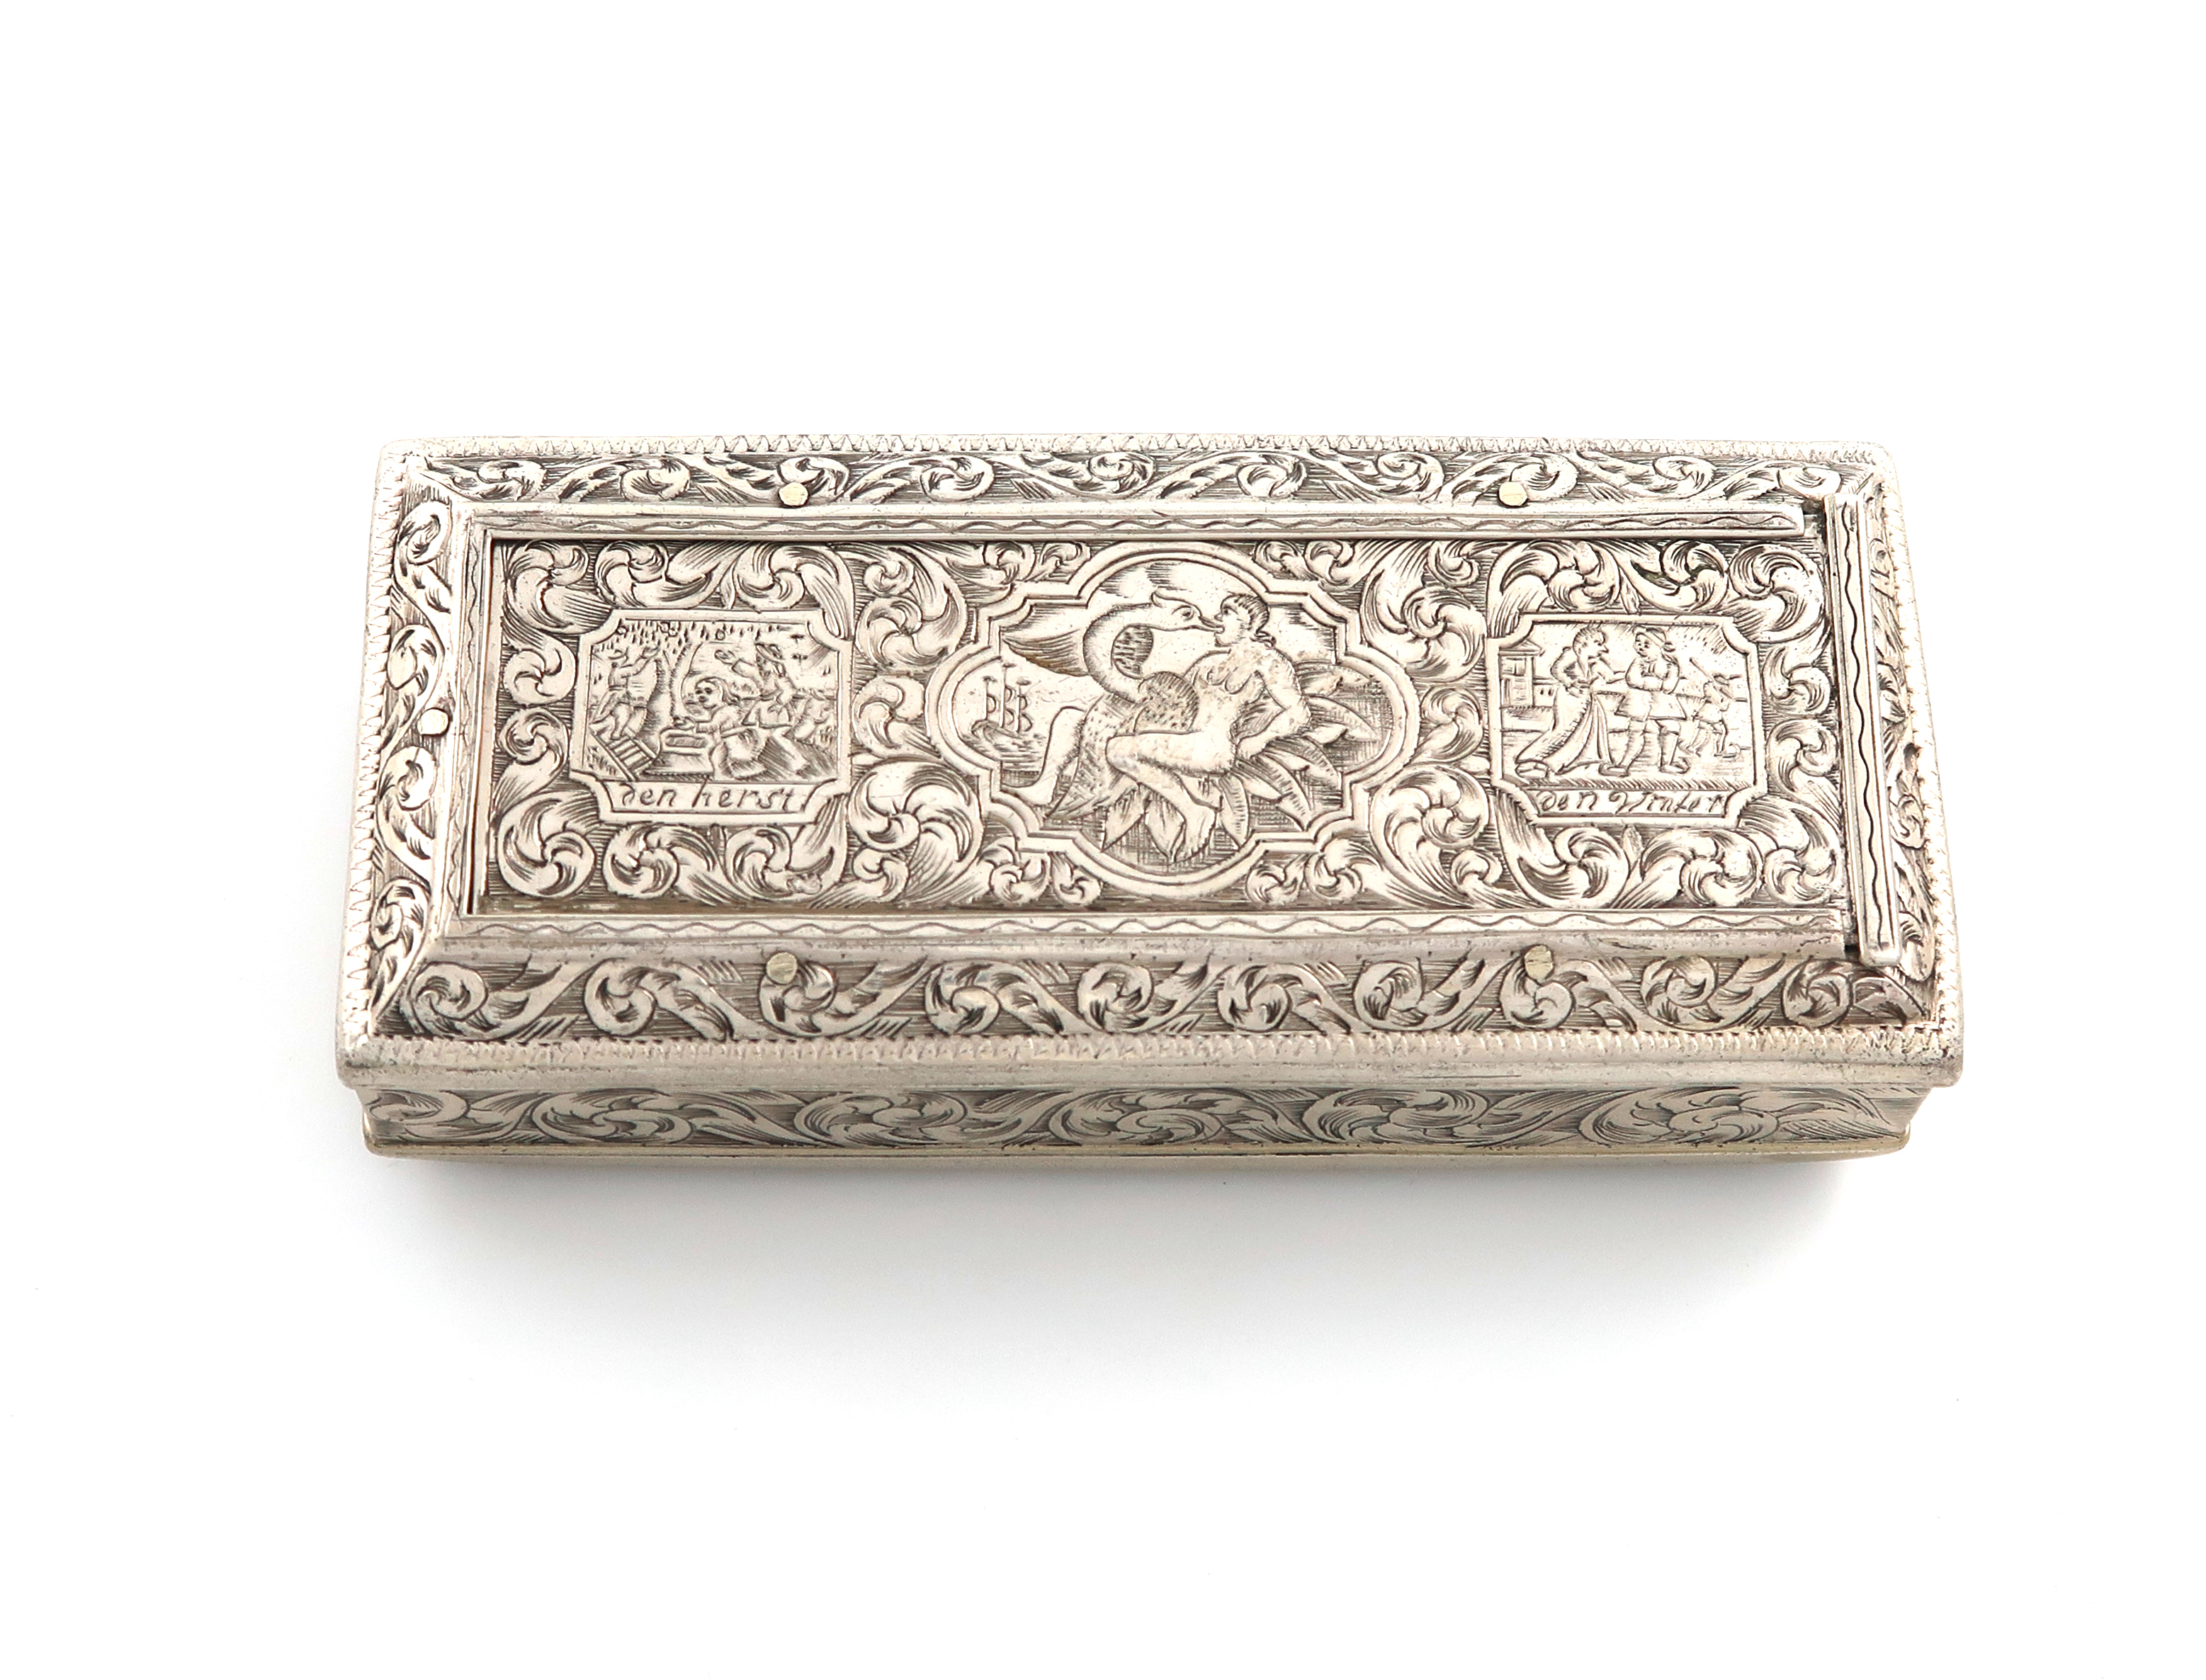 A 19th century Dutch silver tobacco box, by Rinze Jans Spaanstra, in the early 17th century